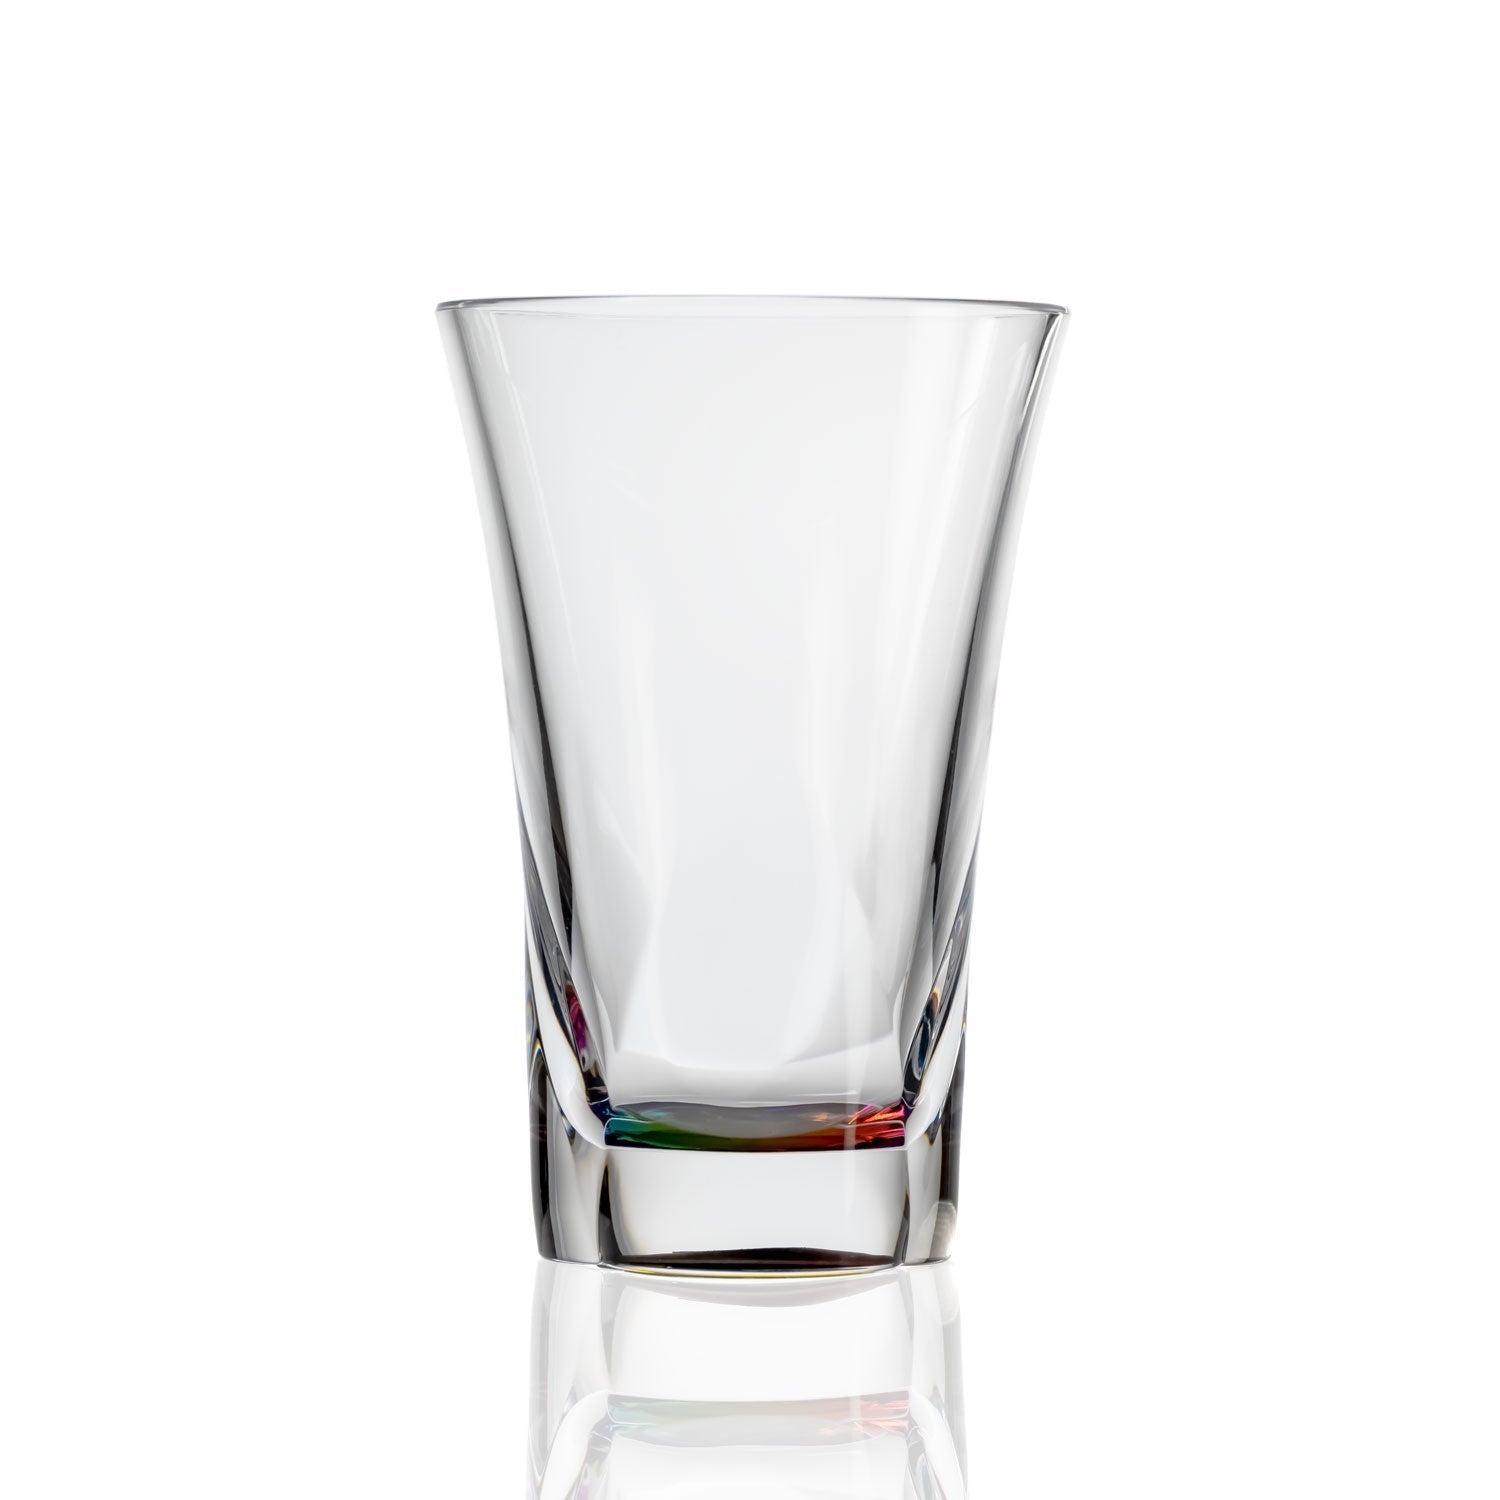 16-ounce rainbow acrylic tumbler in the Fiori collection by Merritt Designs. Front view on white background